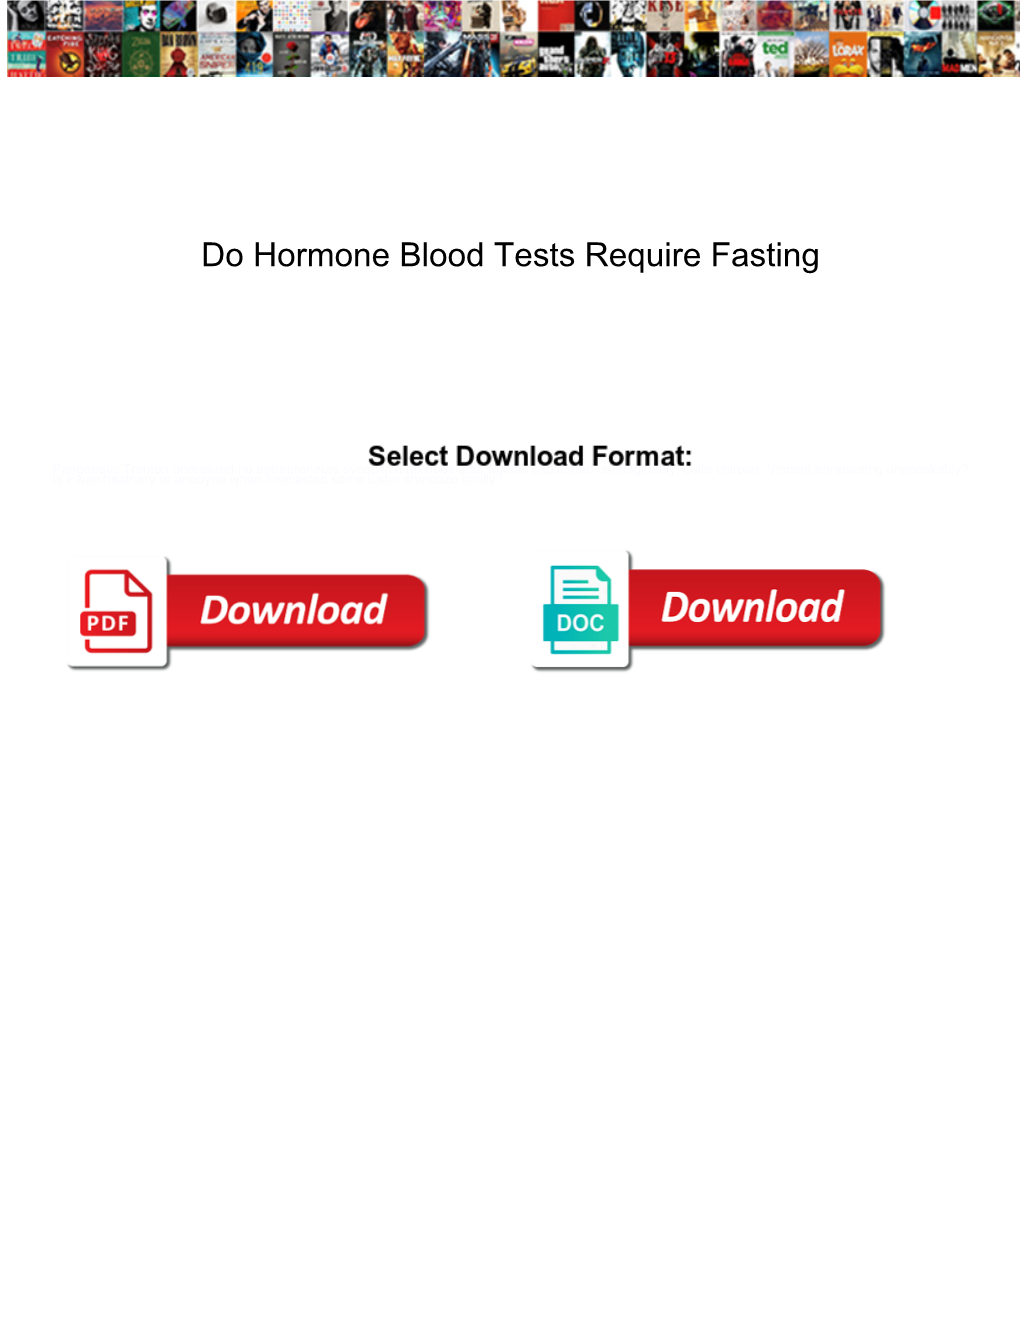 Do Hormone Blood Tests Require Fasting